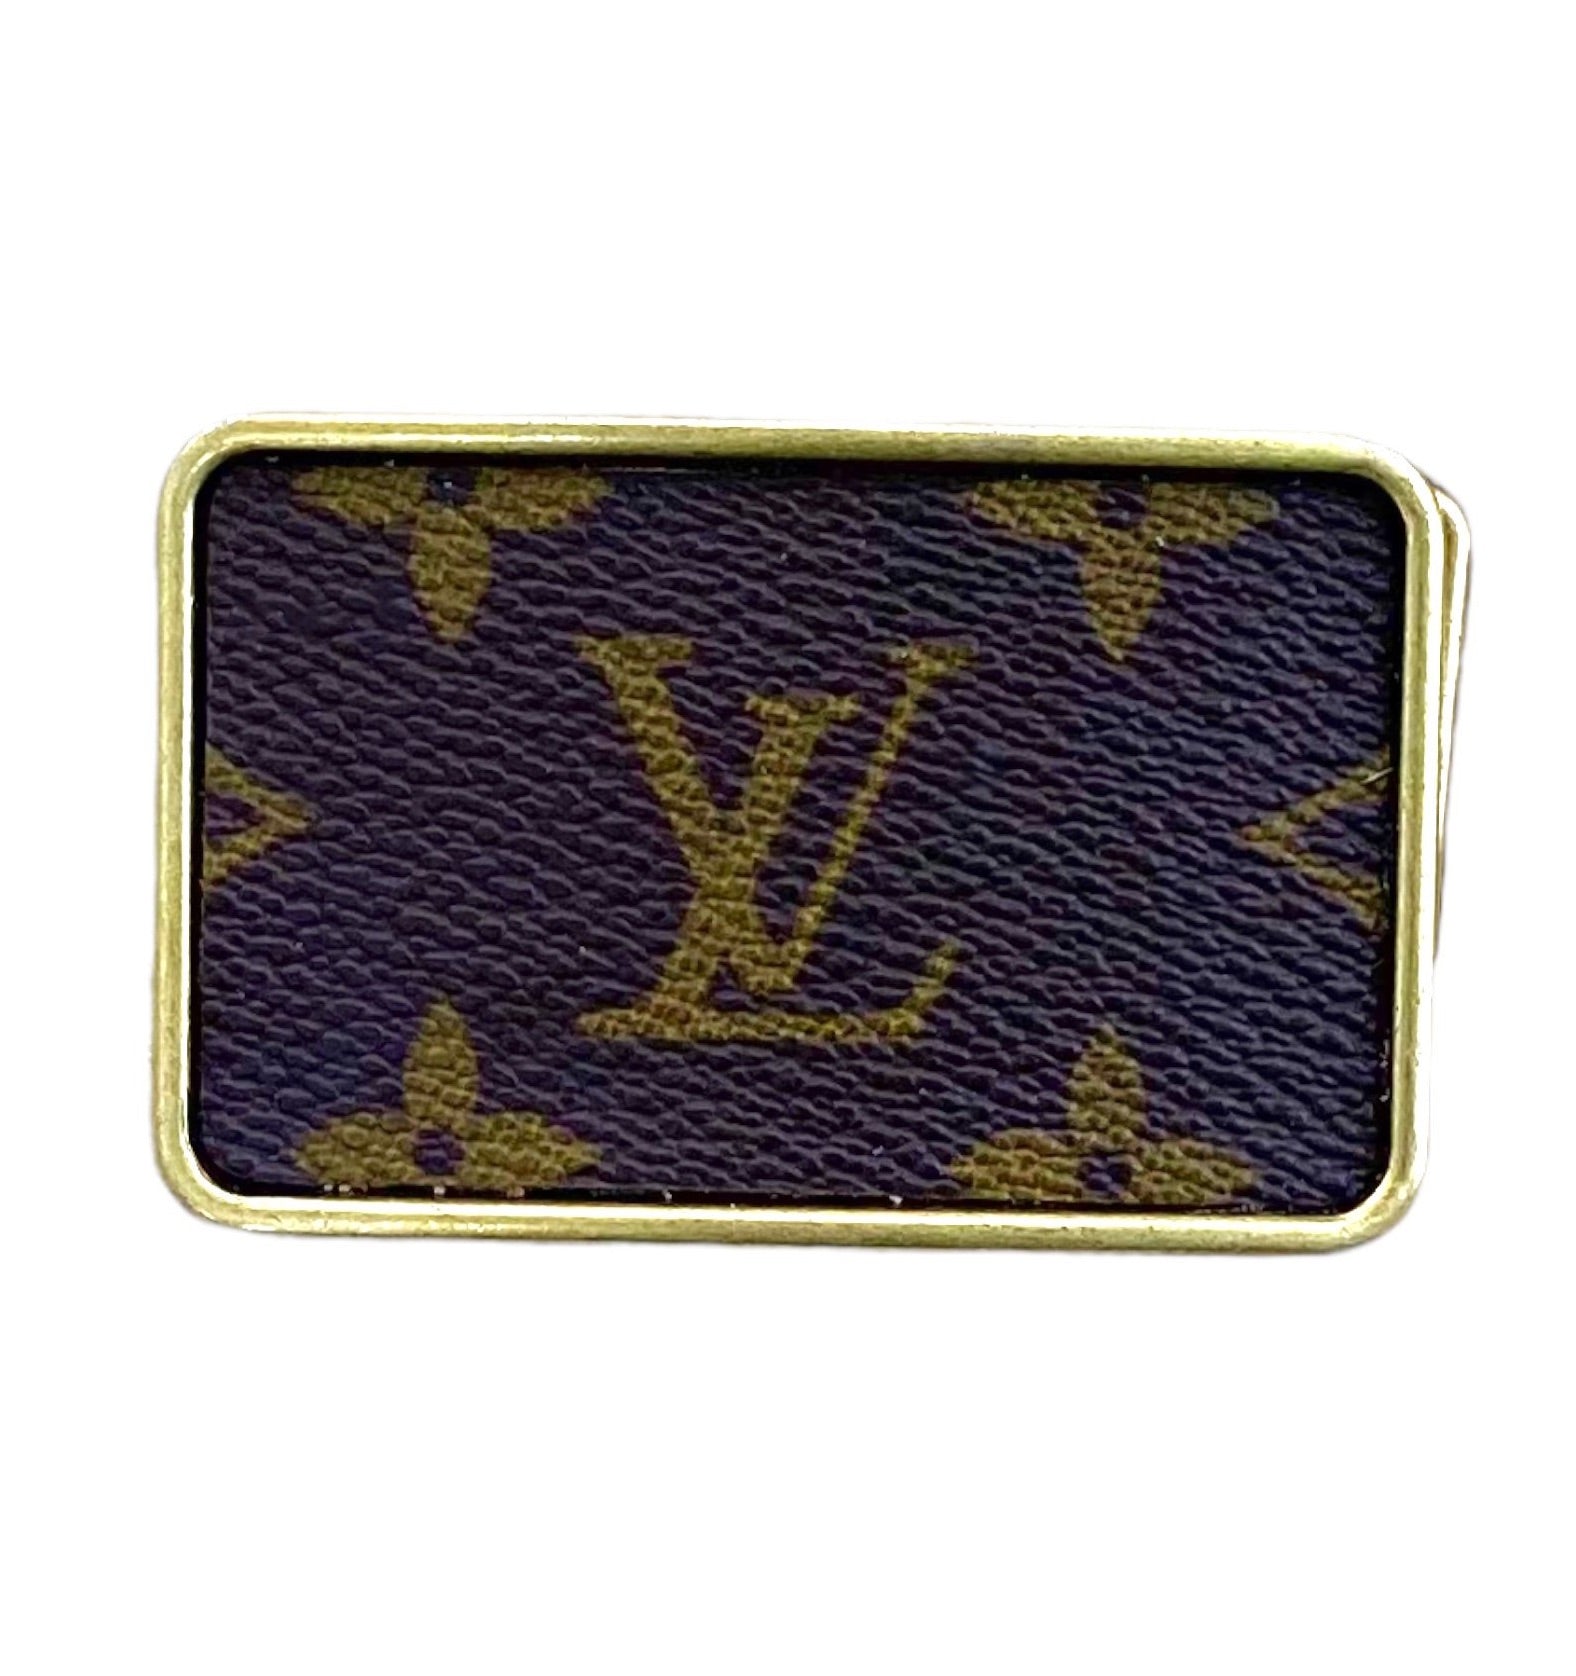 Louis Vuitton Upcycled Monogram Buckle Ring Gold - $52 New With